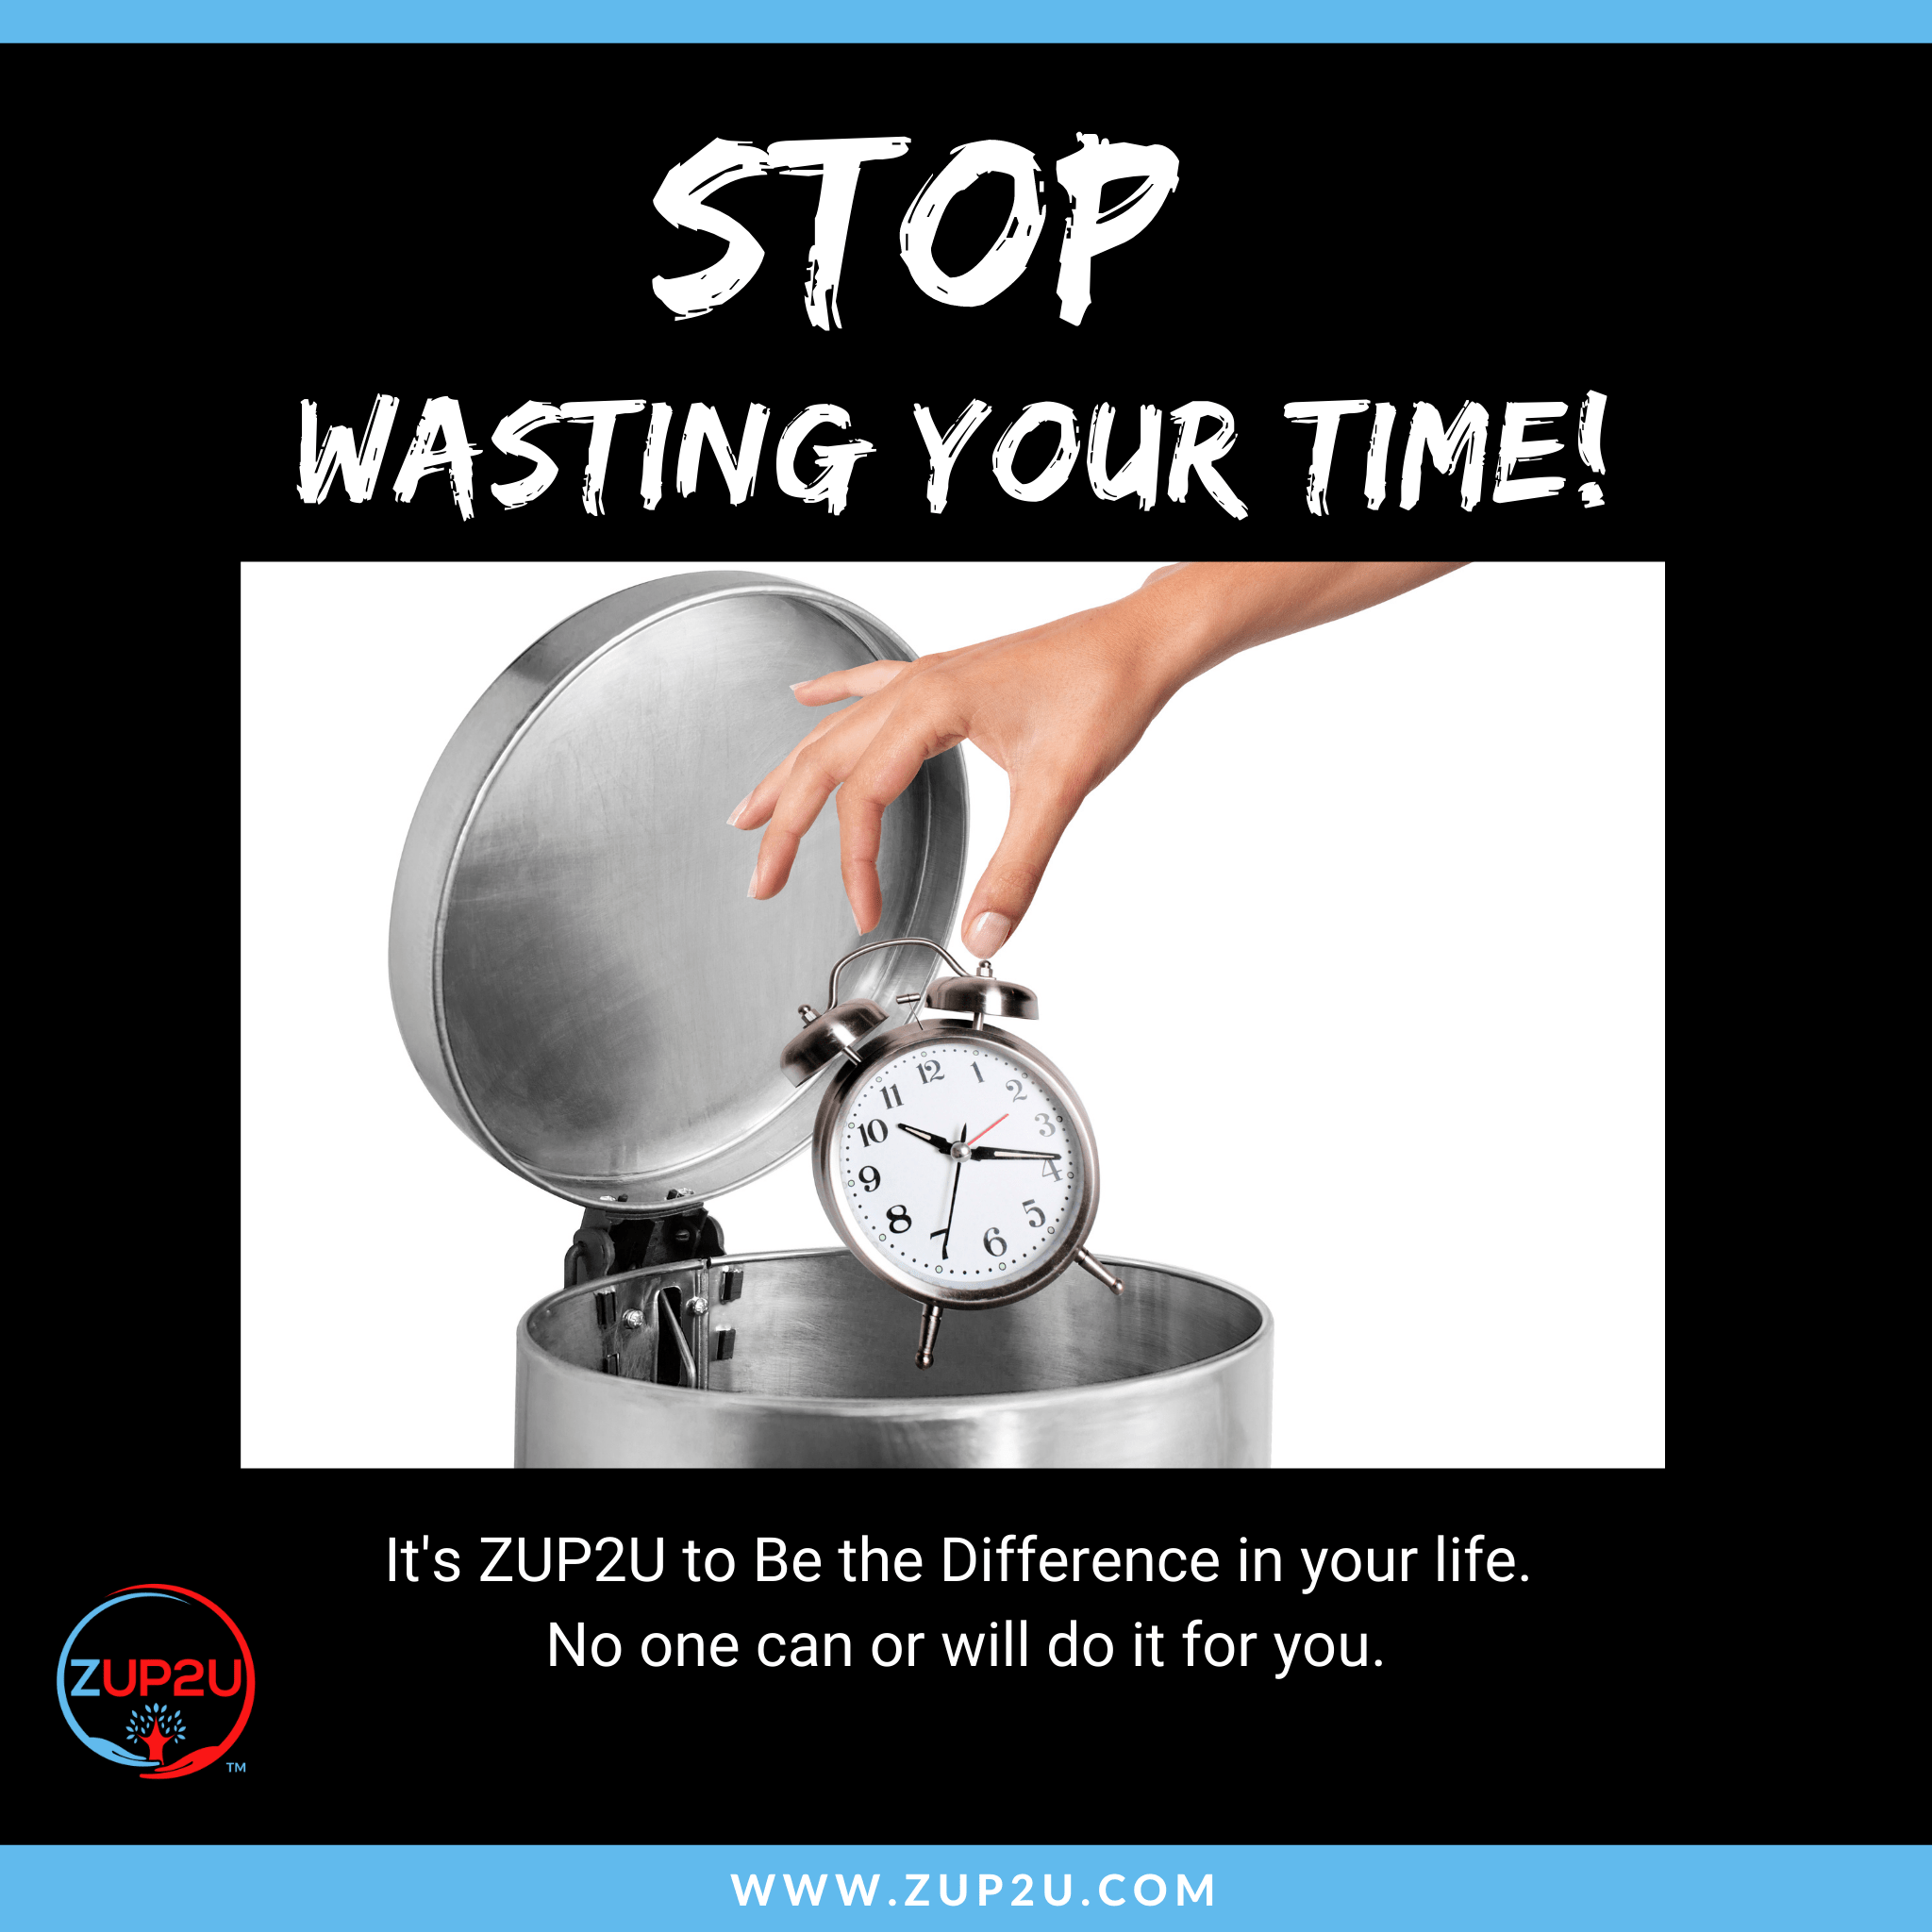 STOP WASTING YOUR TIME!